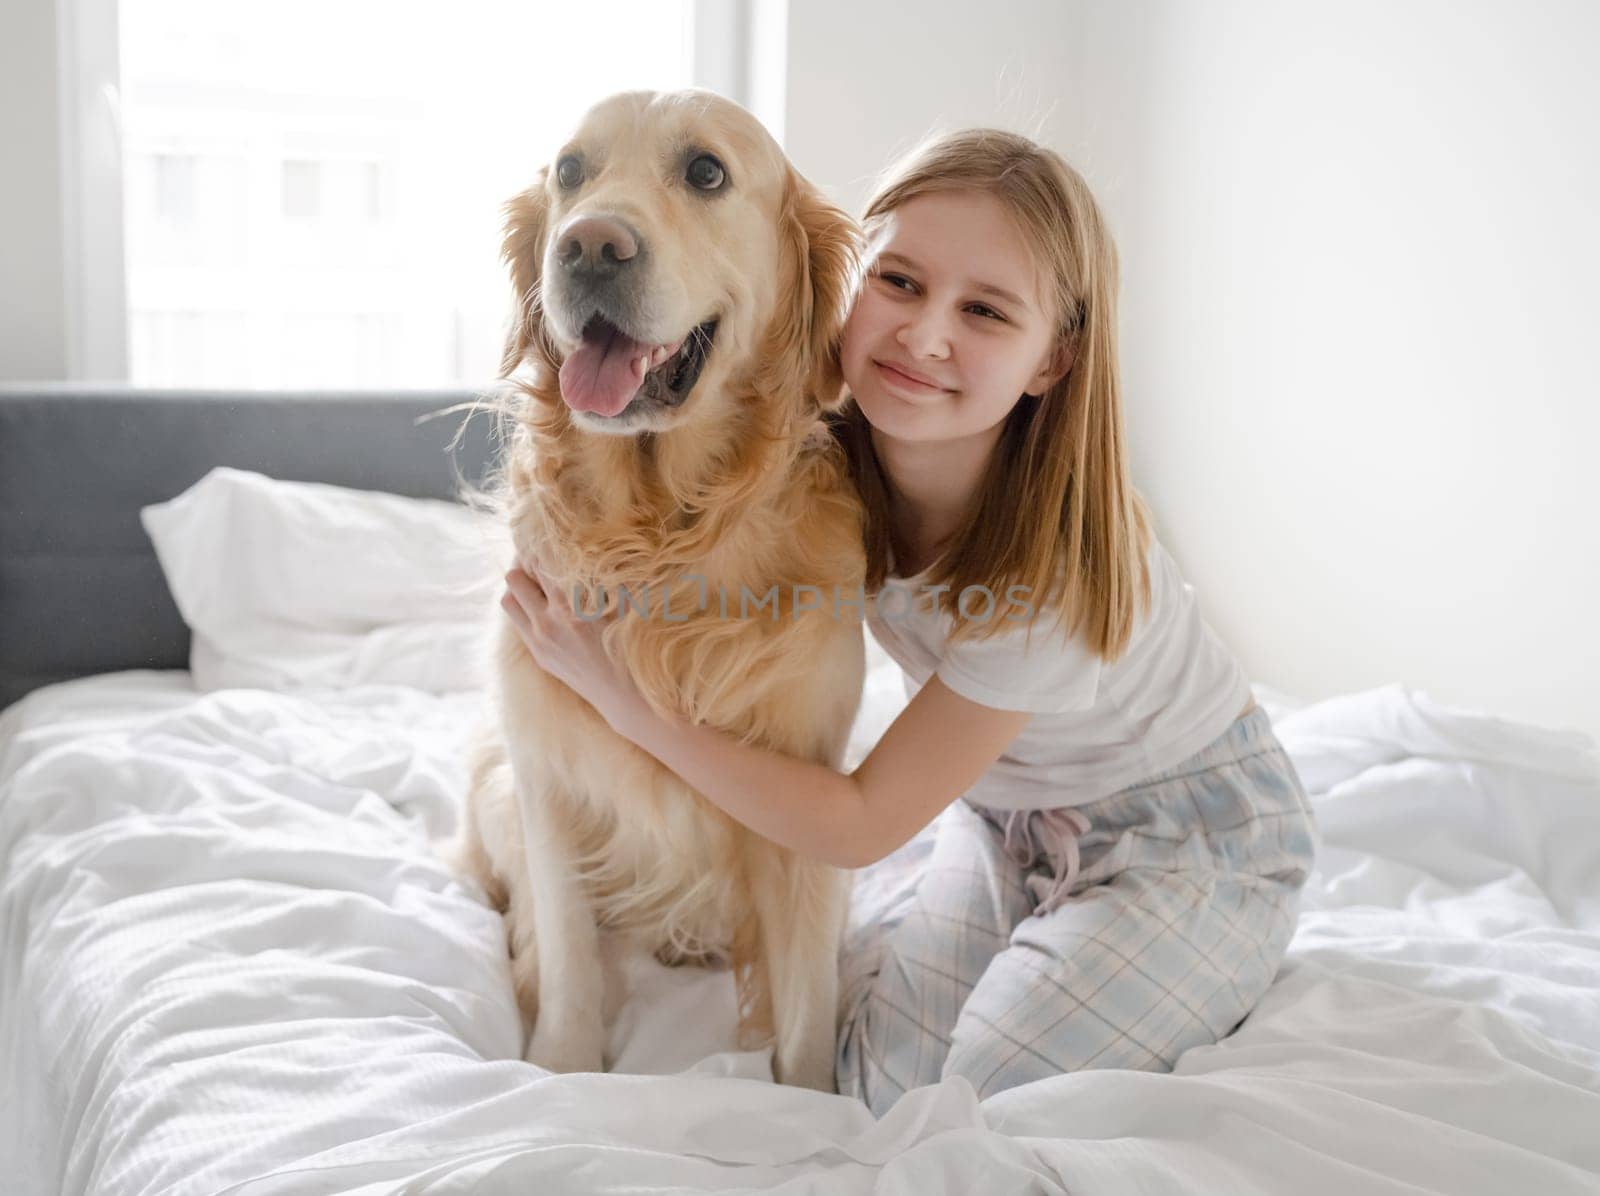 Girl Poses With Golden Retriever In Bed In The Morning In A Bright Room